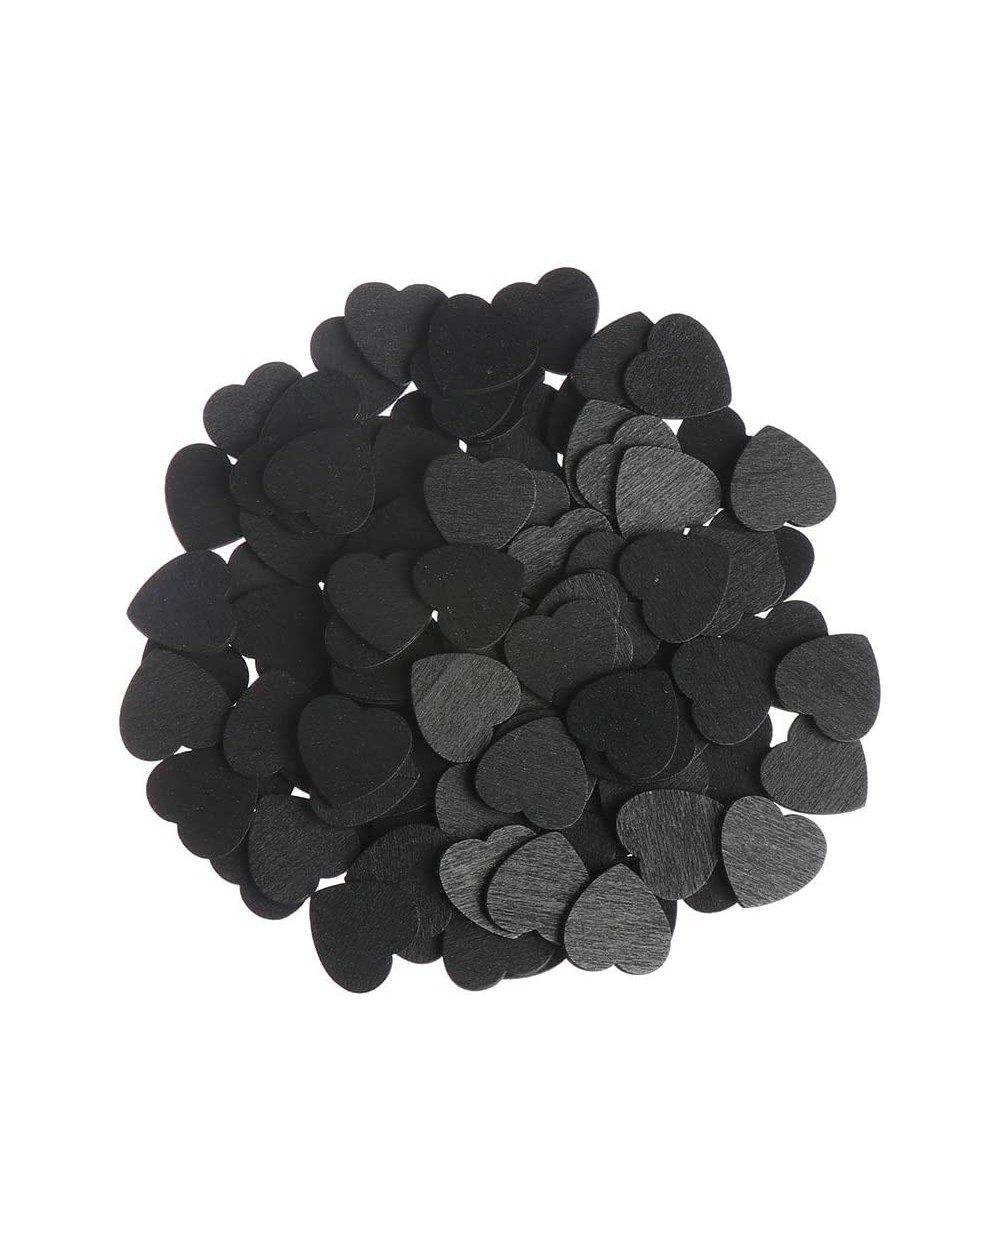 Confetti Wall Sticker Hearts Shaped Wood Crafts Wooden Chips Confetti Slices 100pcs 18mm New Year colloc ation(Black) - Black...